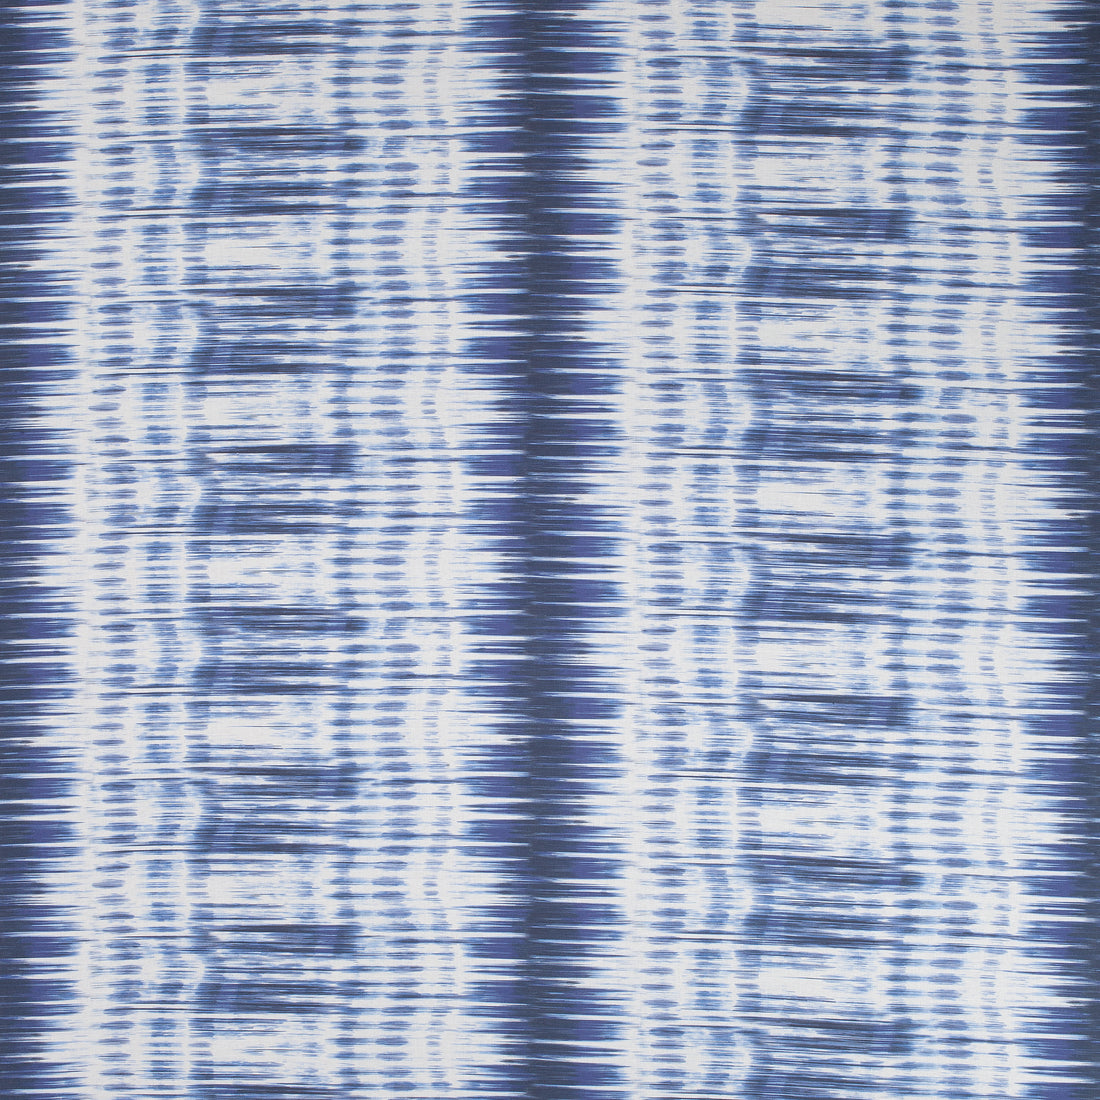 Ikat Stripe fabric in navy color - pattern number F988702 - by Thibaut in the Trade Routes collection